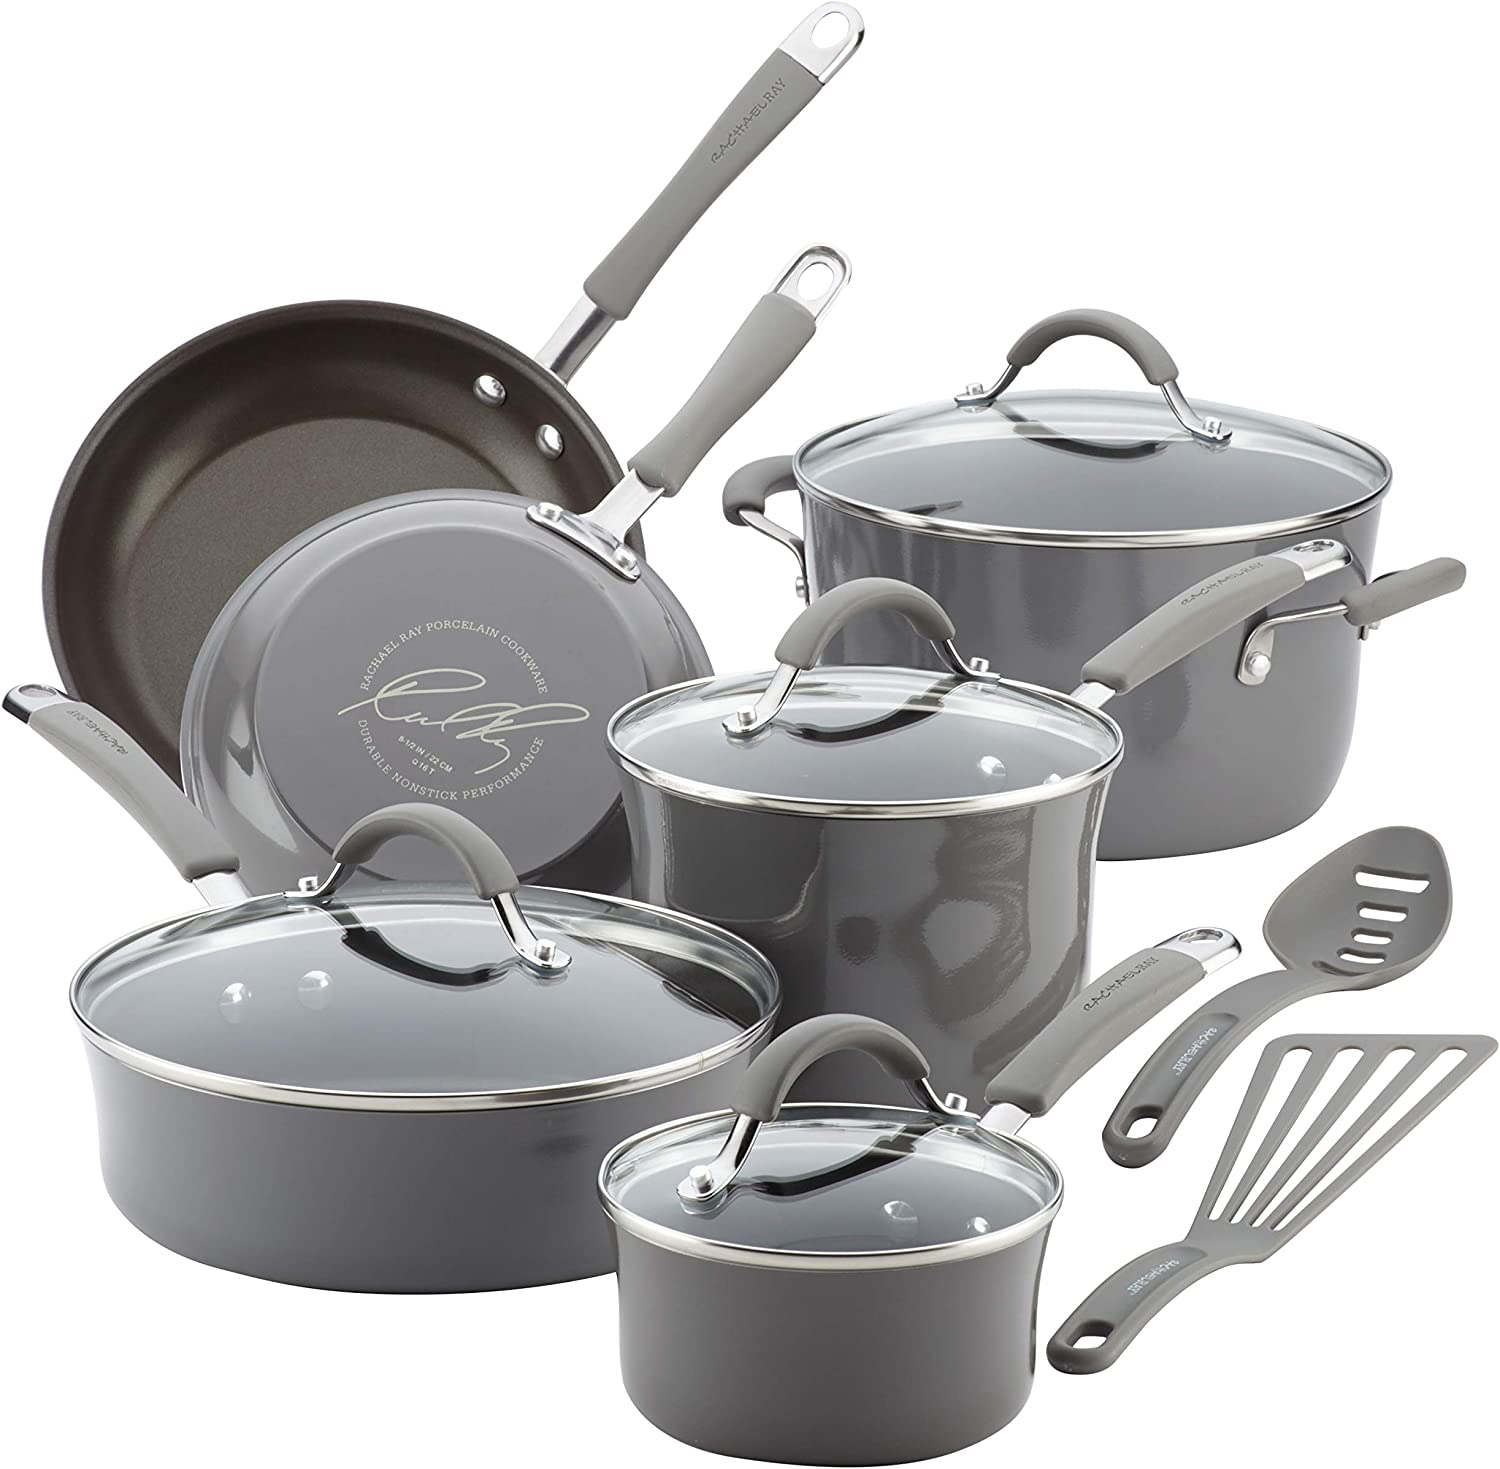 Rachael Ray Cookware Set- Amazon Prime Day Deal!